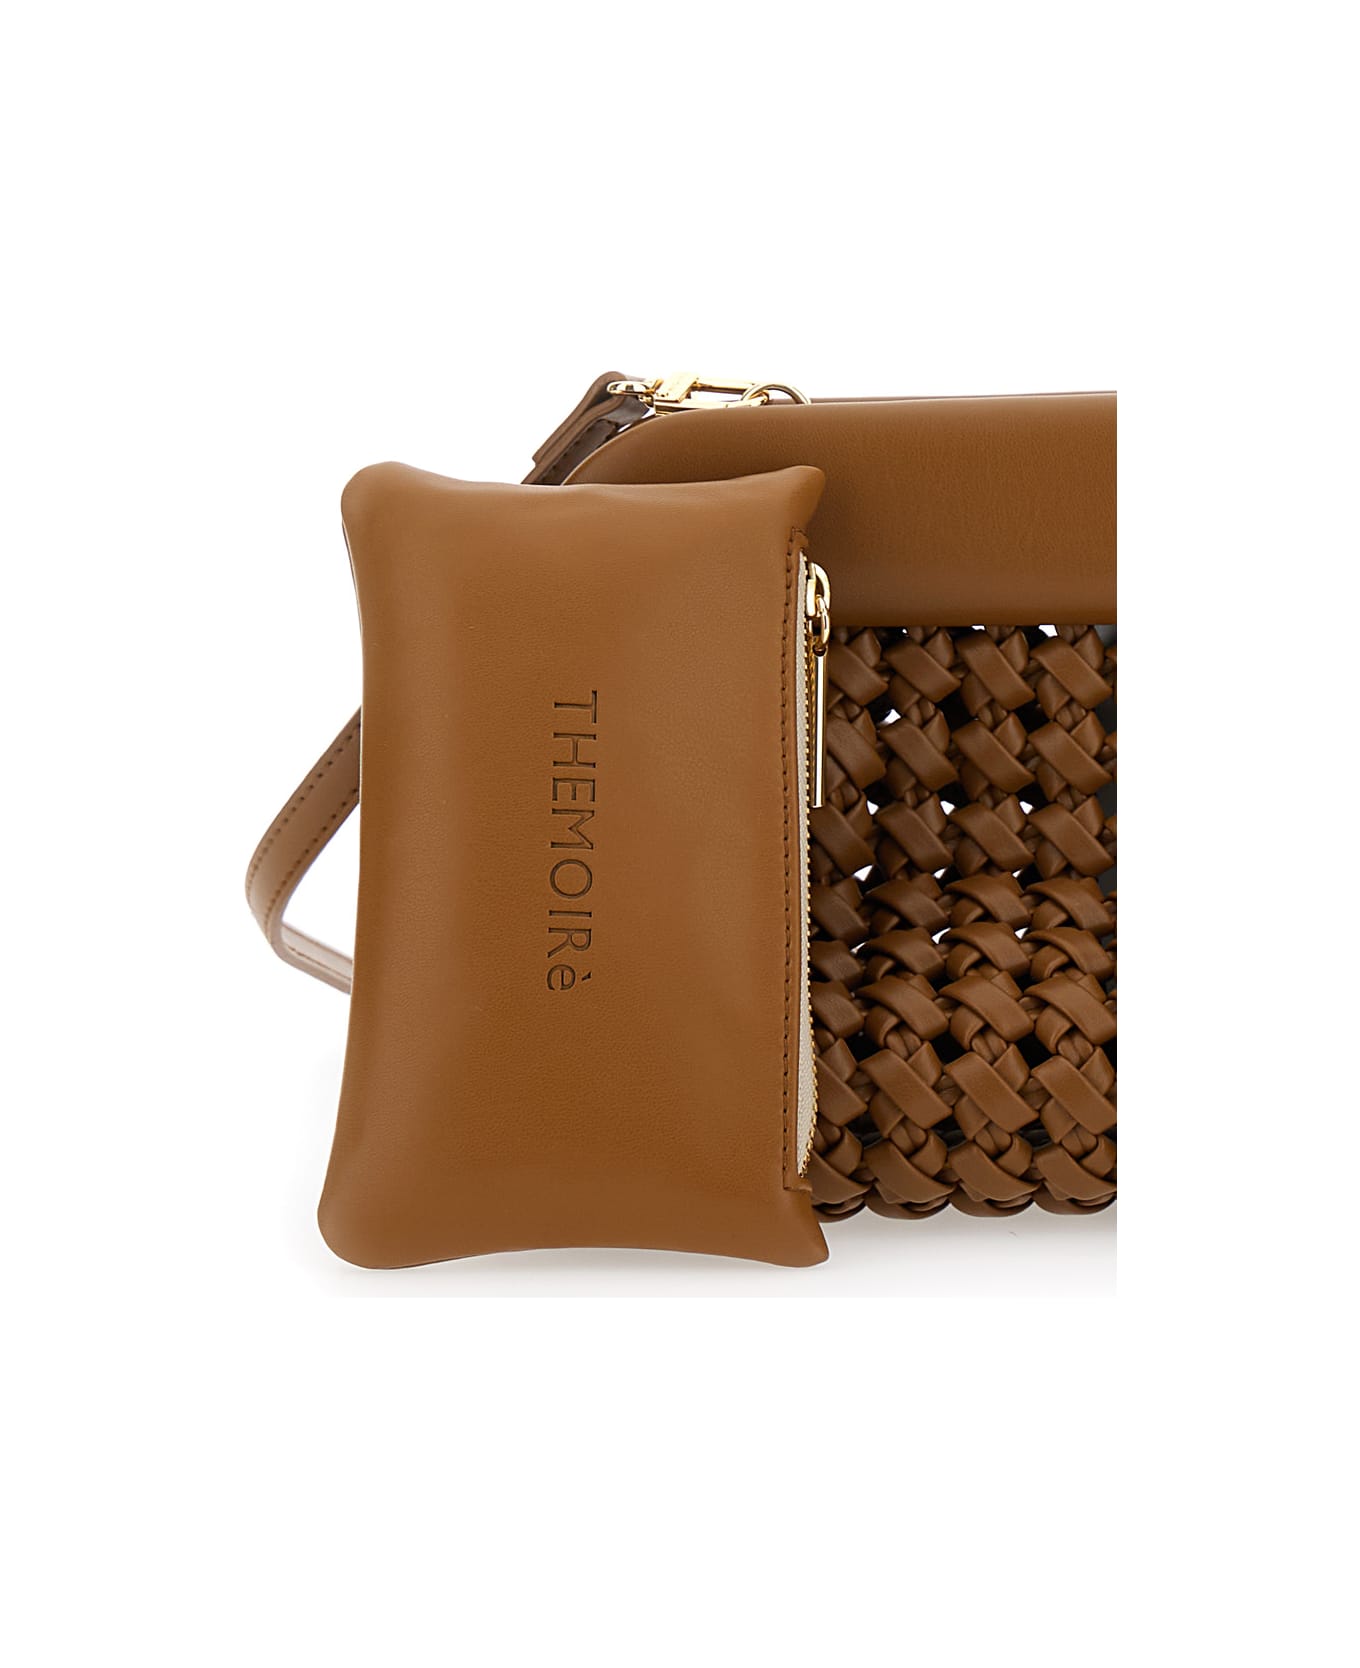 THEMOIRè 'bios Knots' Brown Clutch Bag With Braided Design In Eco Leather Woman - Brown クラッチバッグ